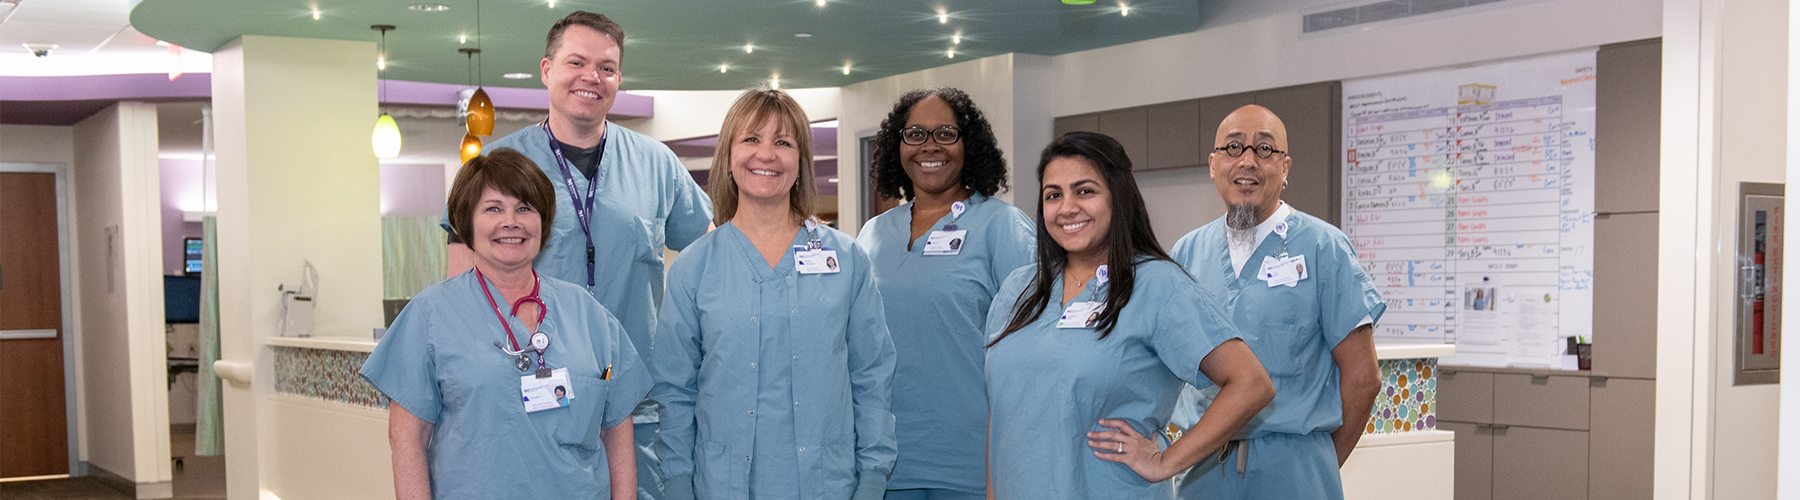 A team of 6 Northwestern Medicine respiratory therapists smiling for a photo together, all wearing light blue scrubs.